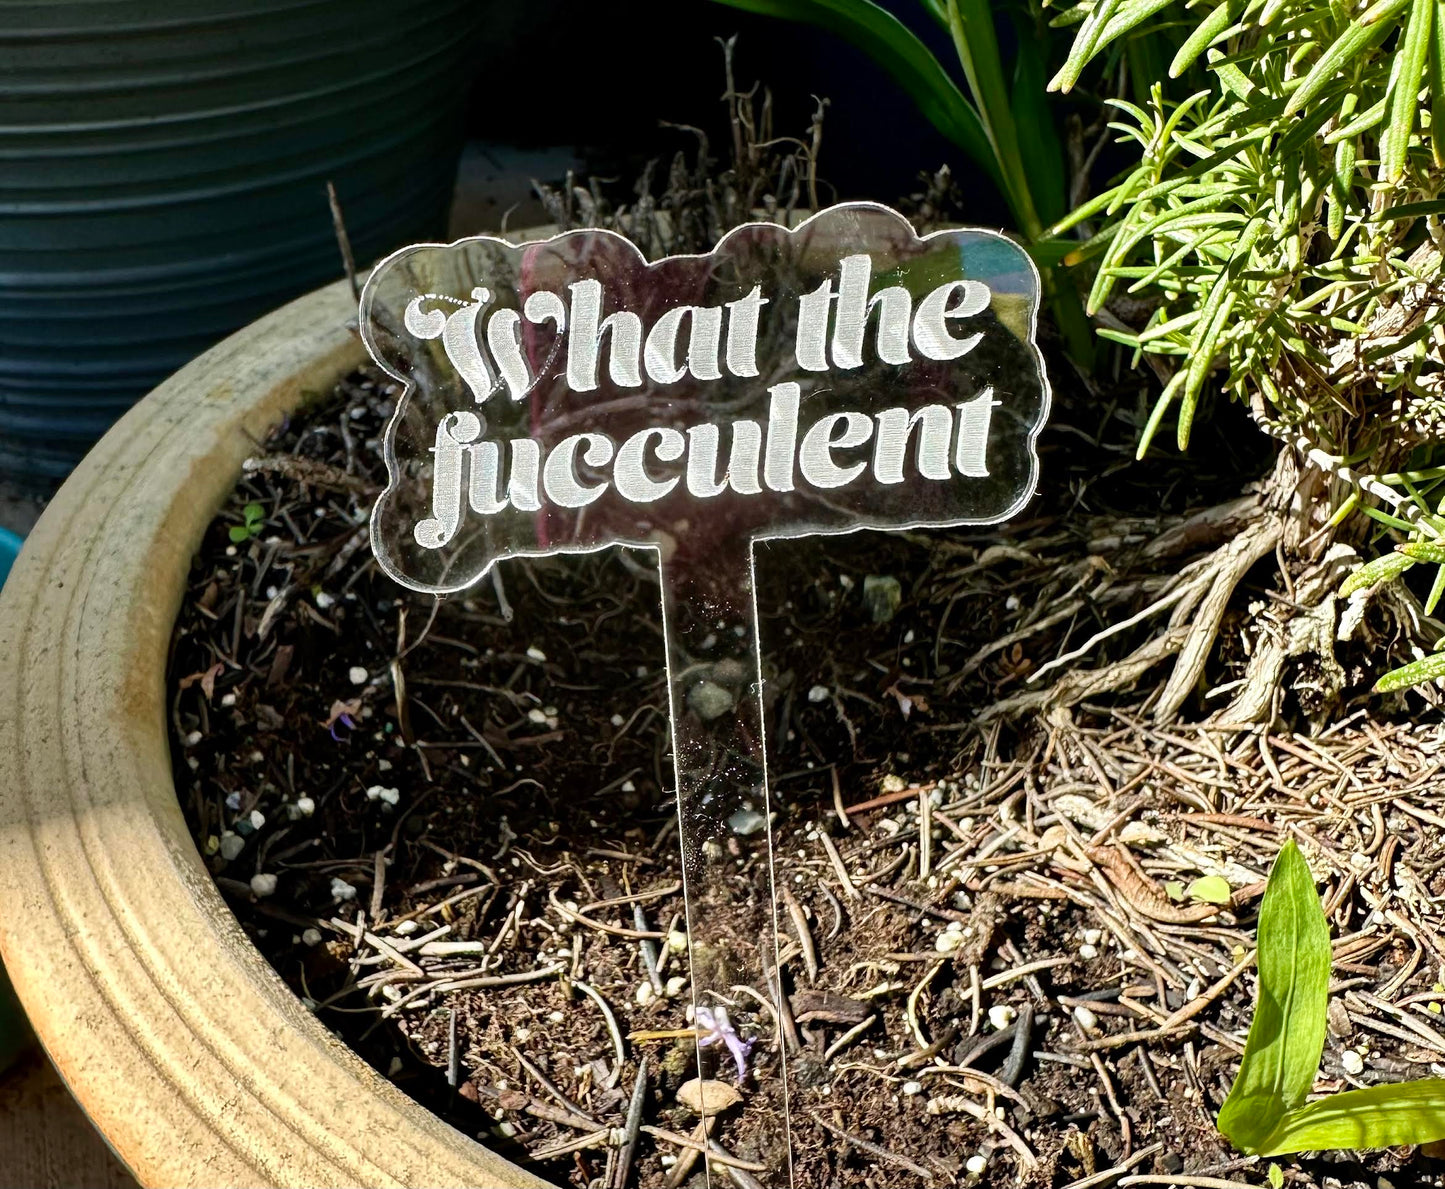 What The Fucculent Acrylic Plant Stake